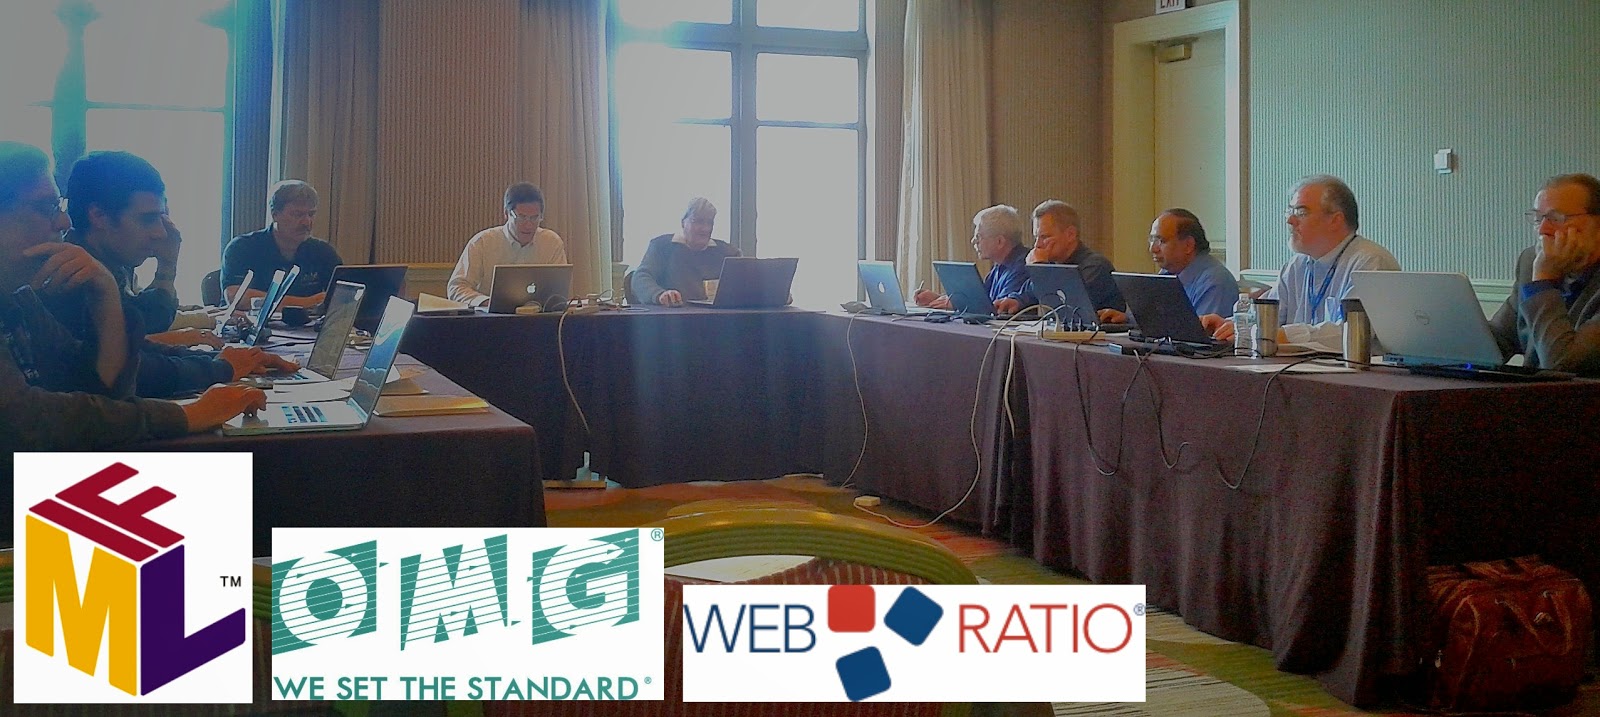 The Object Management Group (OMG) Architecture Board approves the new IFML 1.0 standard on March 2014 in Reston, VA